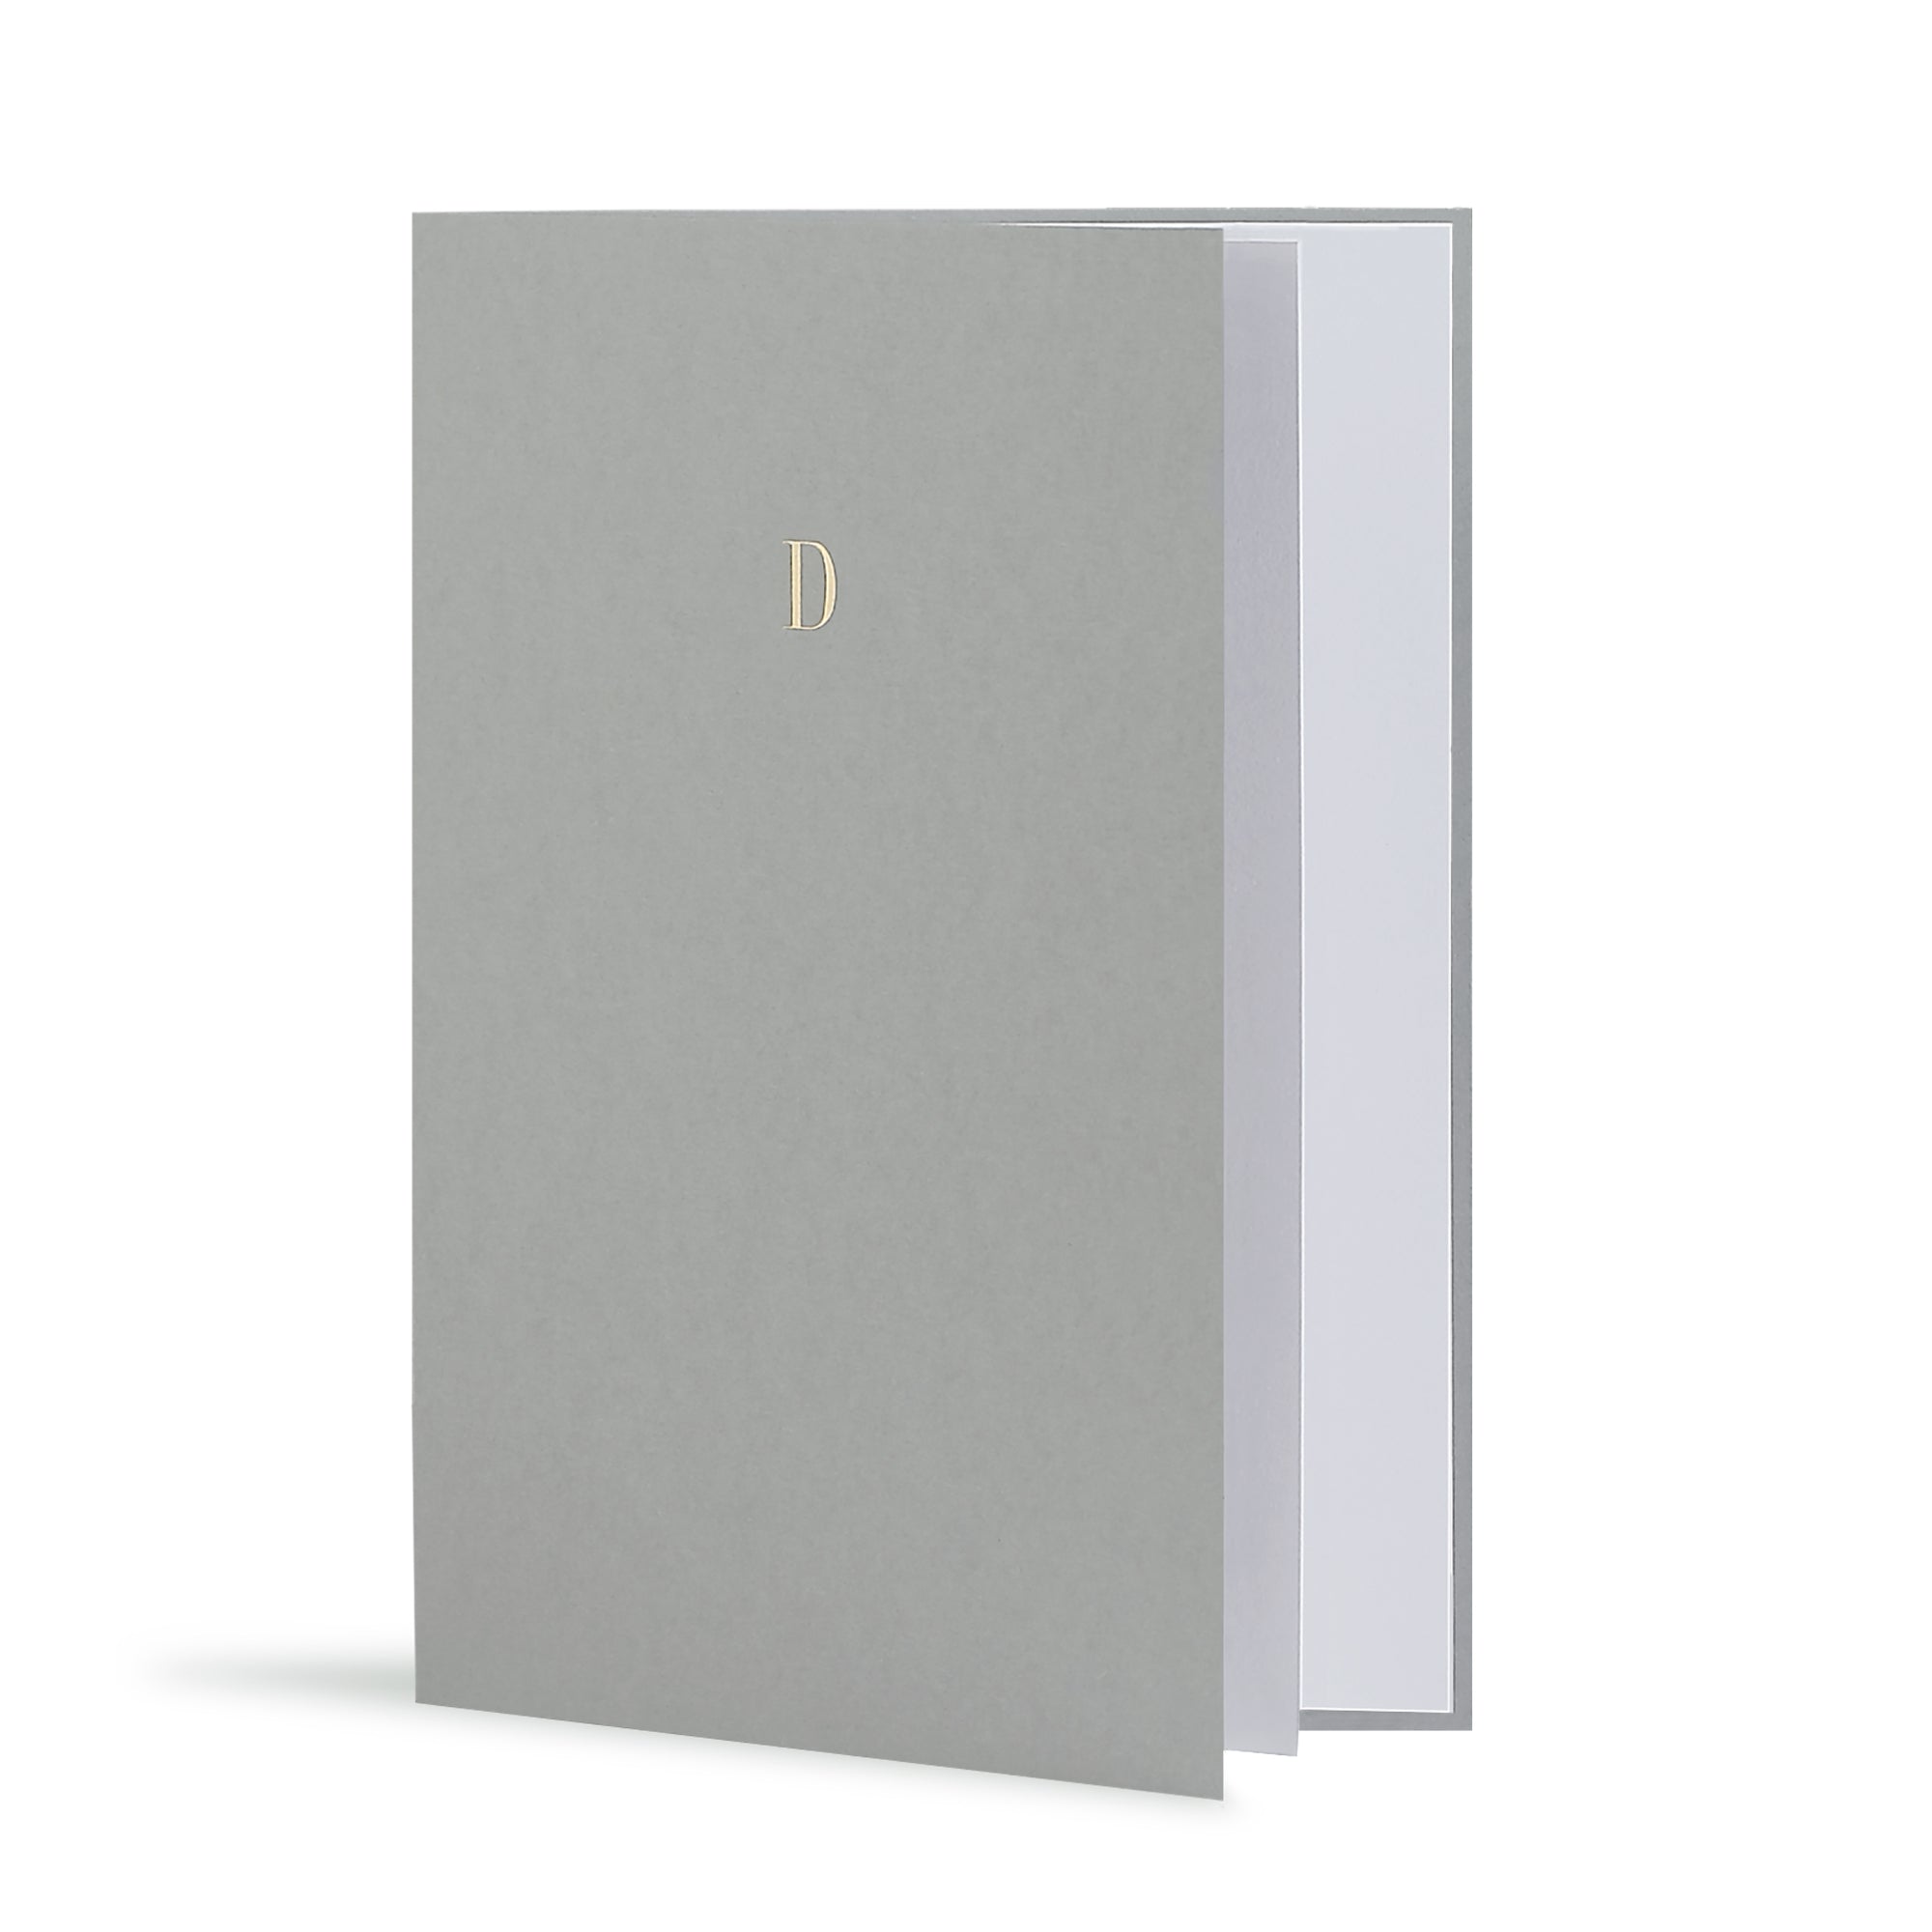 D Greeting Card in Grey, Side | Story of Elegance